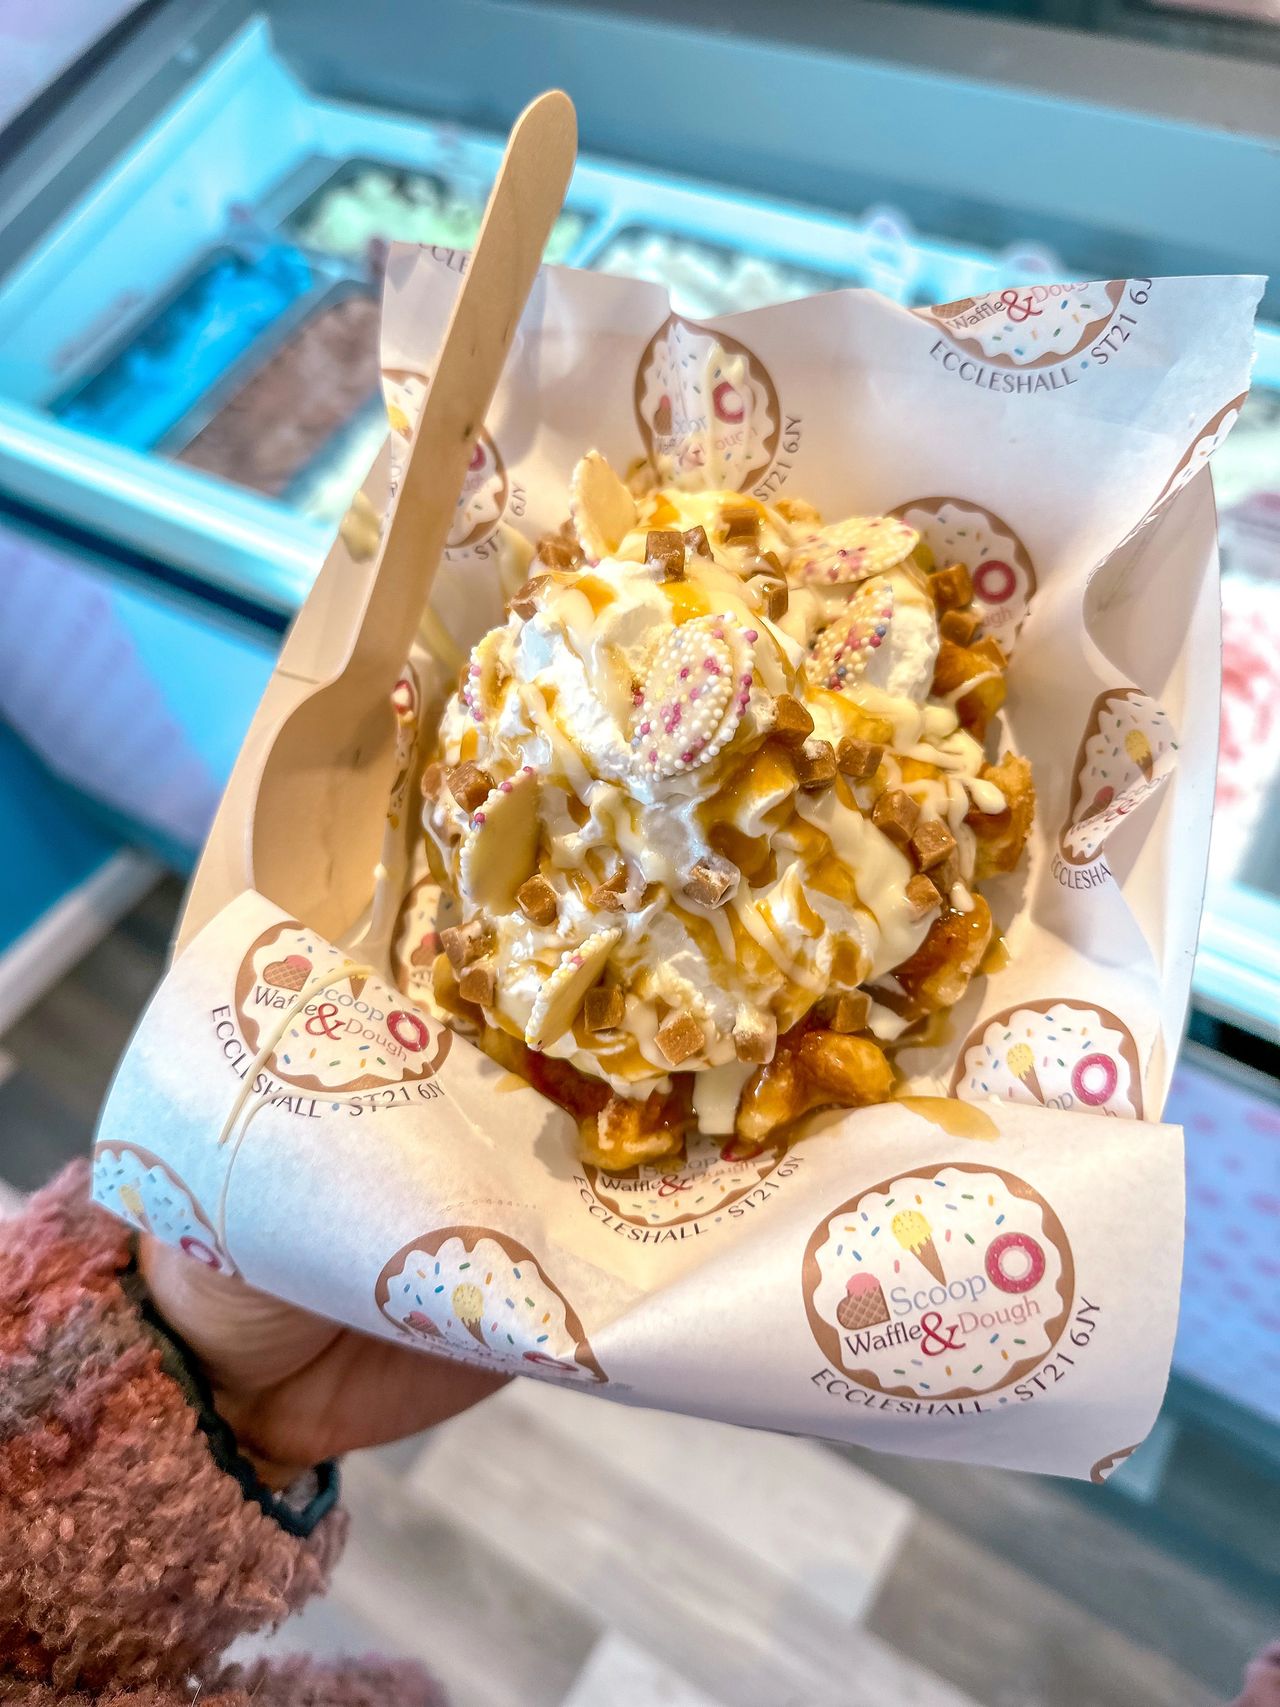 Is the waffle worth the hype at Scoop Waffle & Dough?